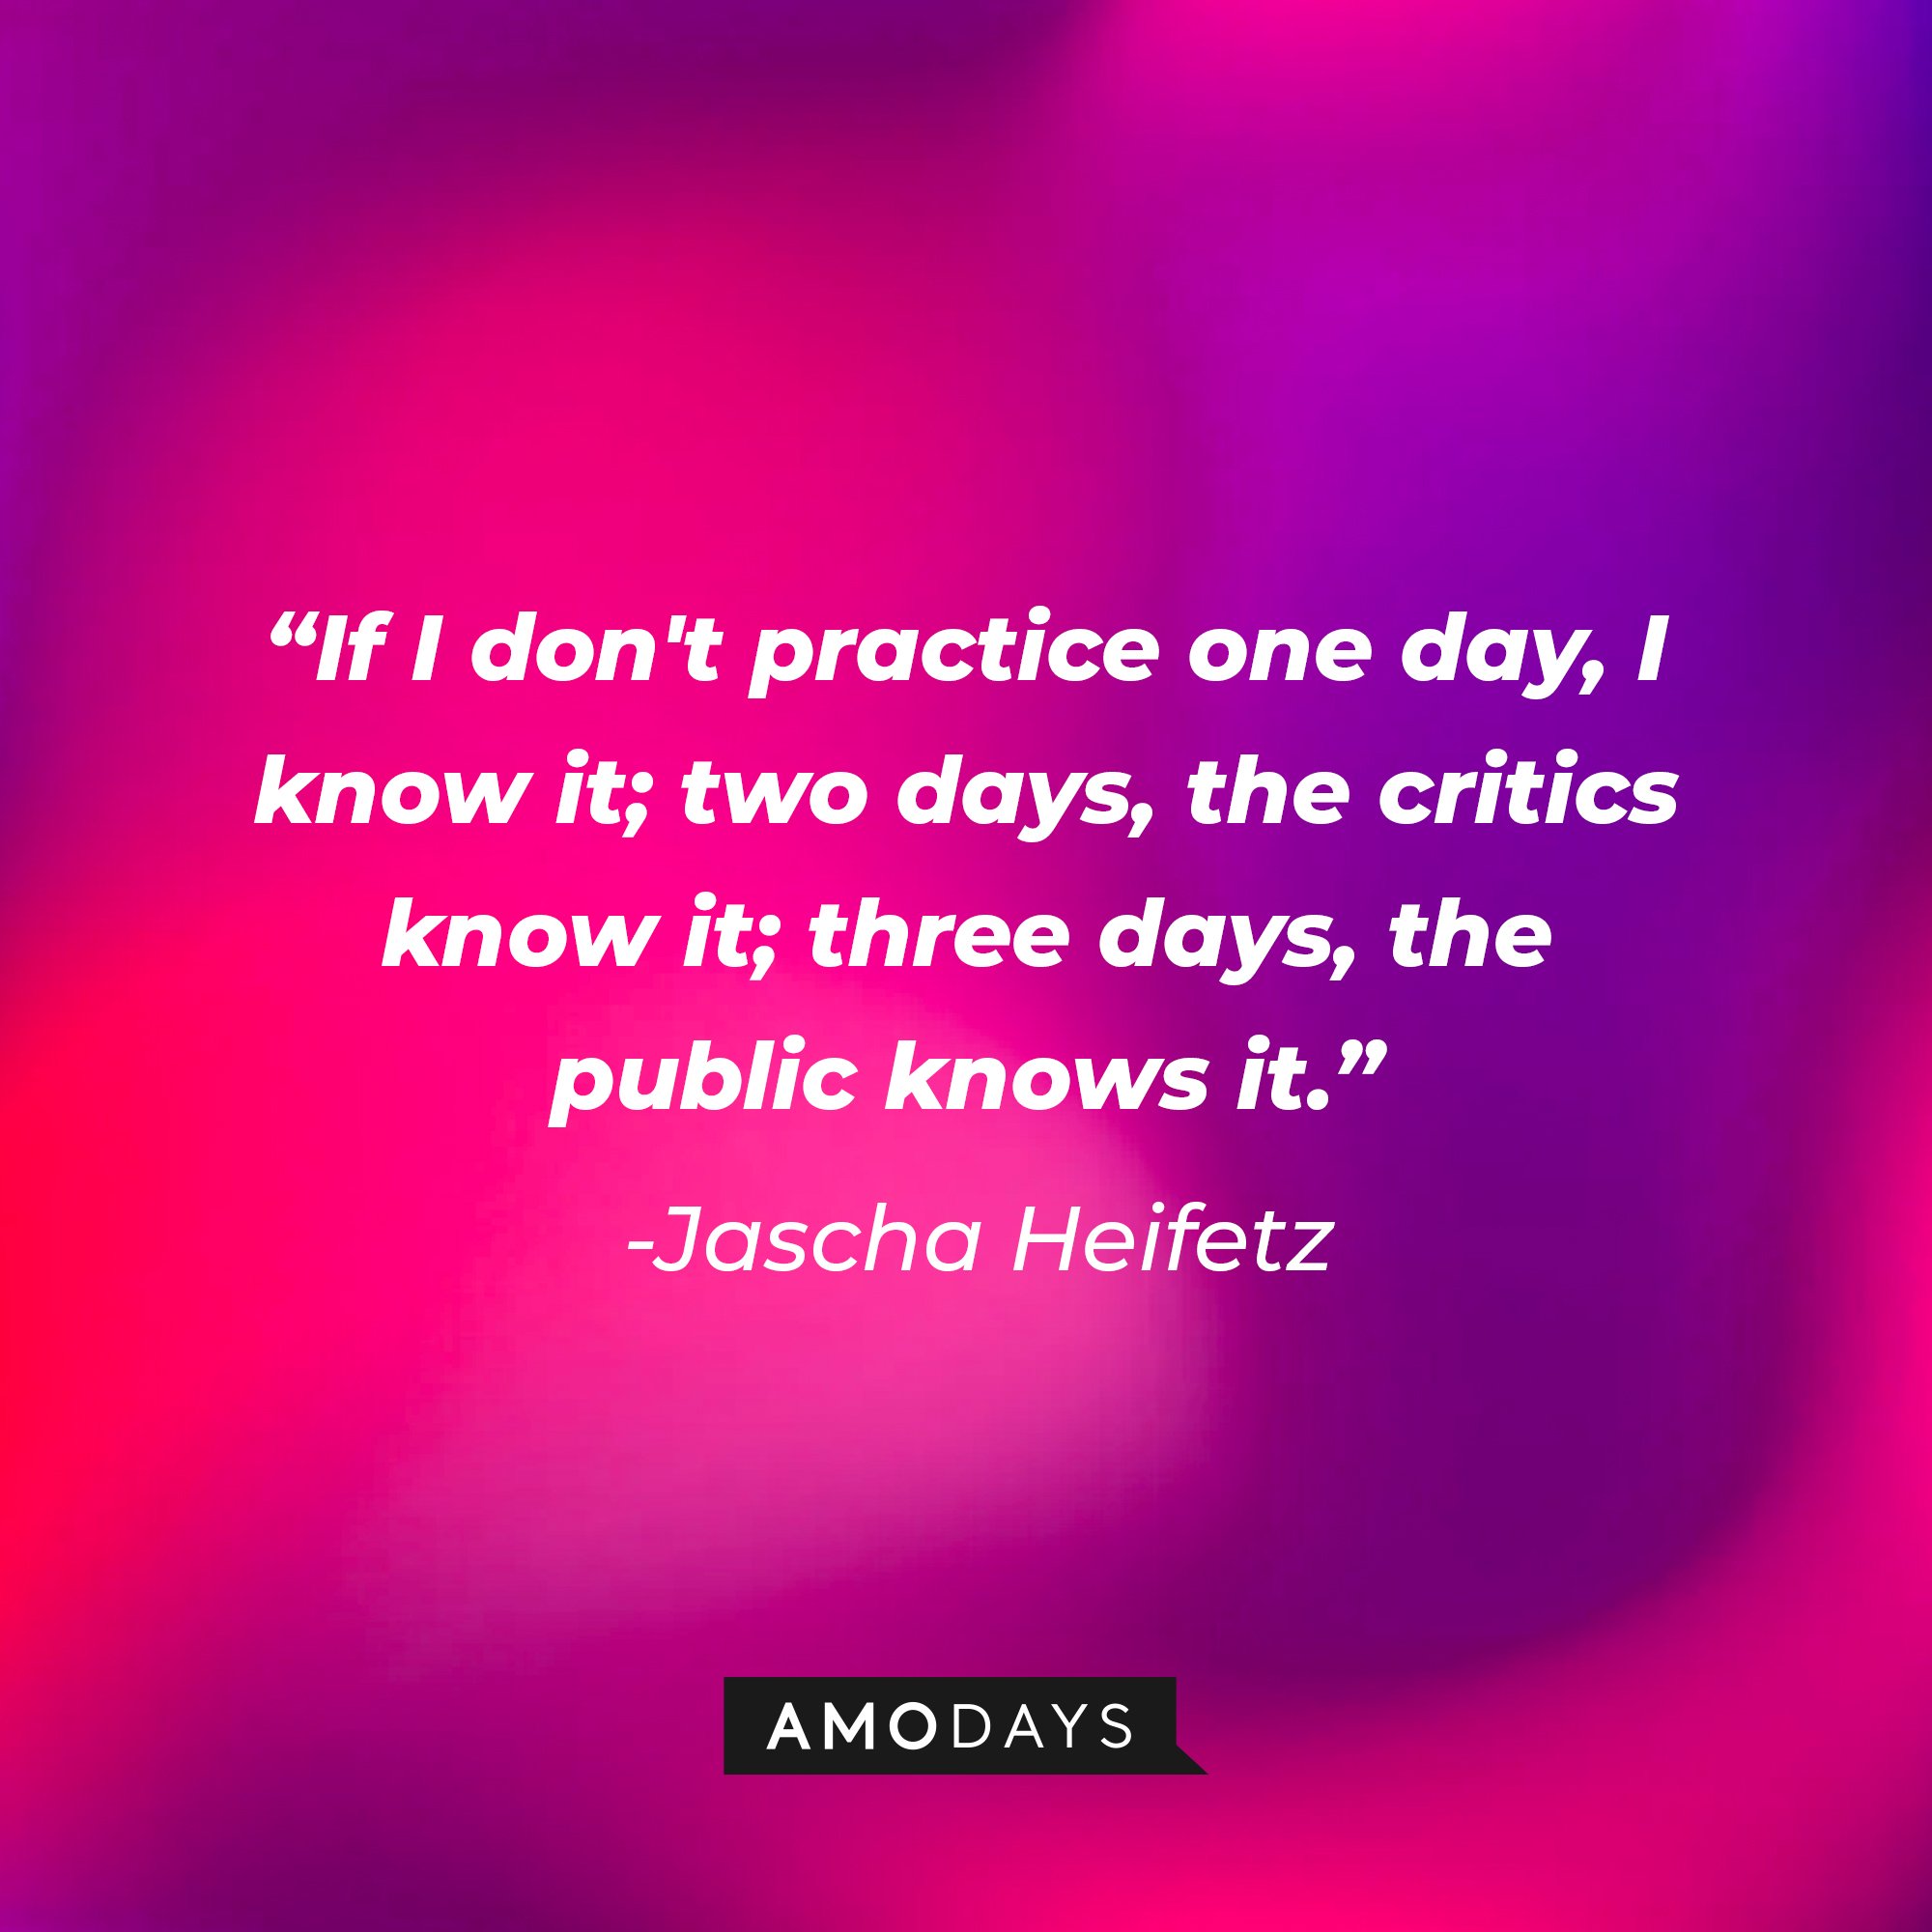 Jascha Heifetz's quote: "If I don't practice one day, I know it; two days, the critics know it; three days, the public knows it." | Image: AmoDays